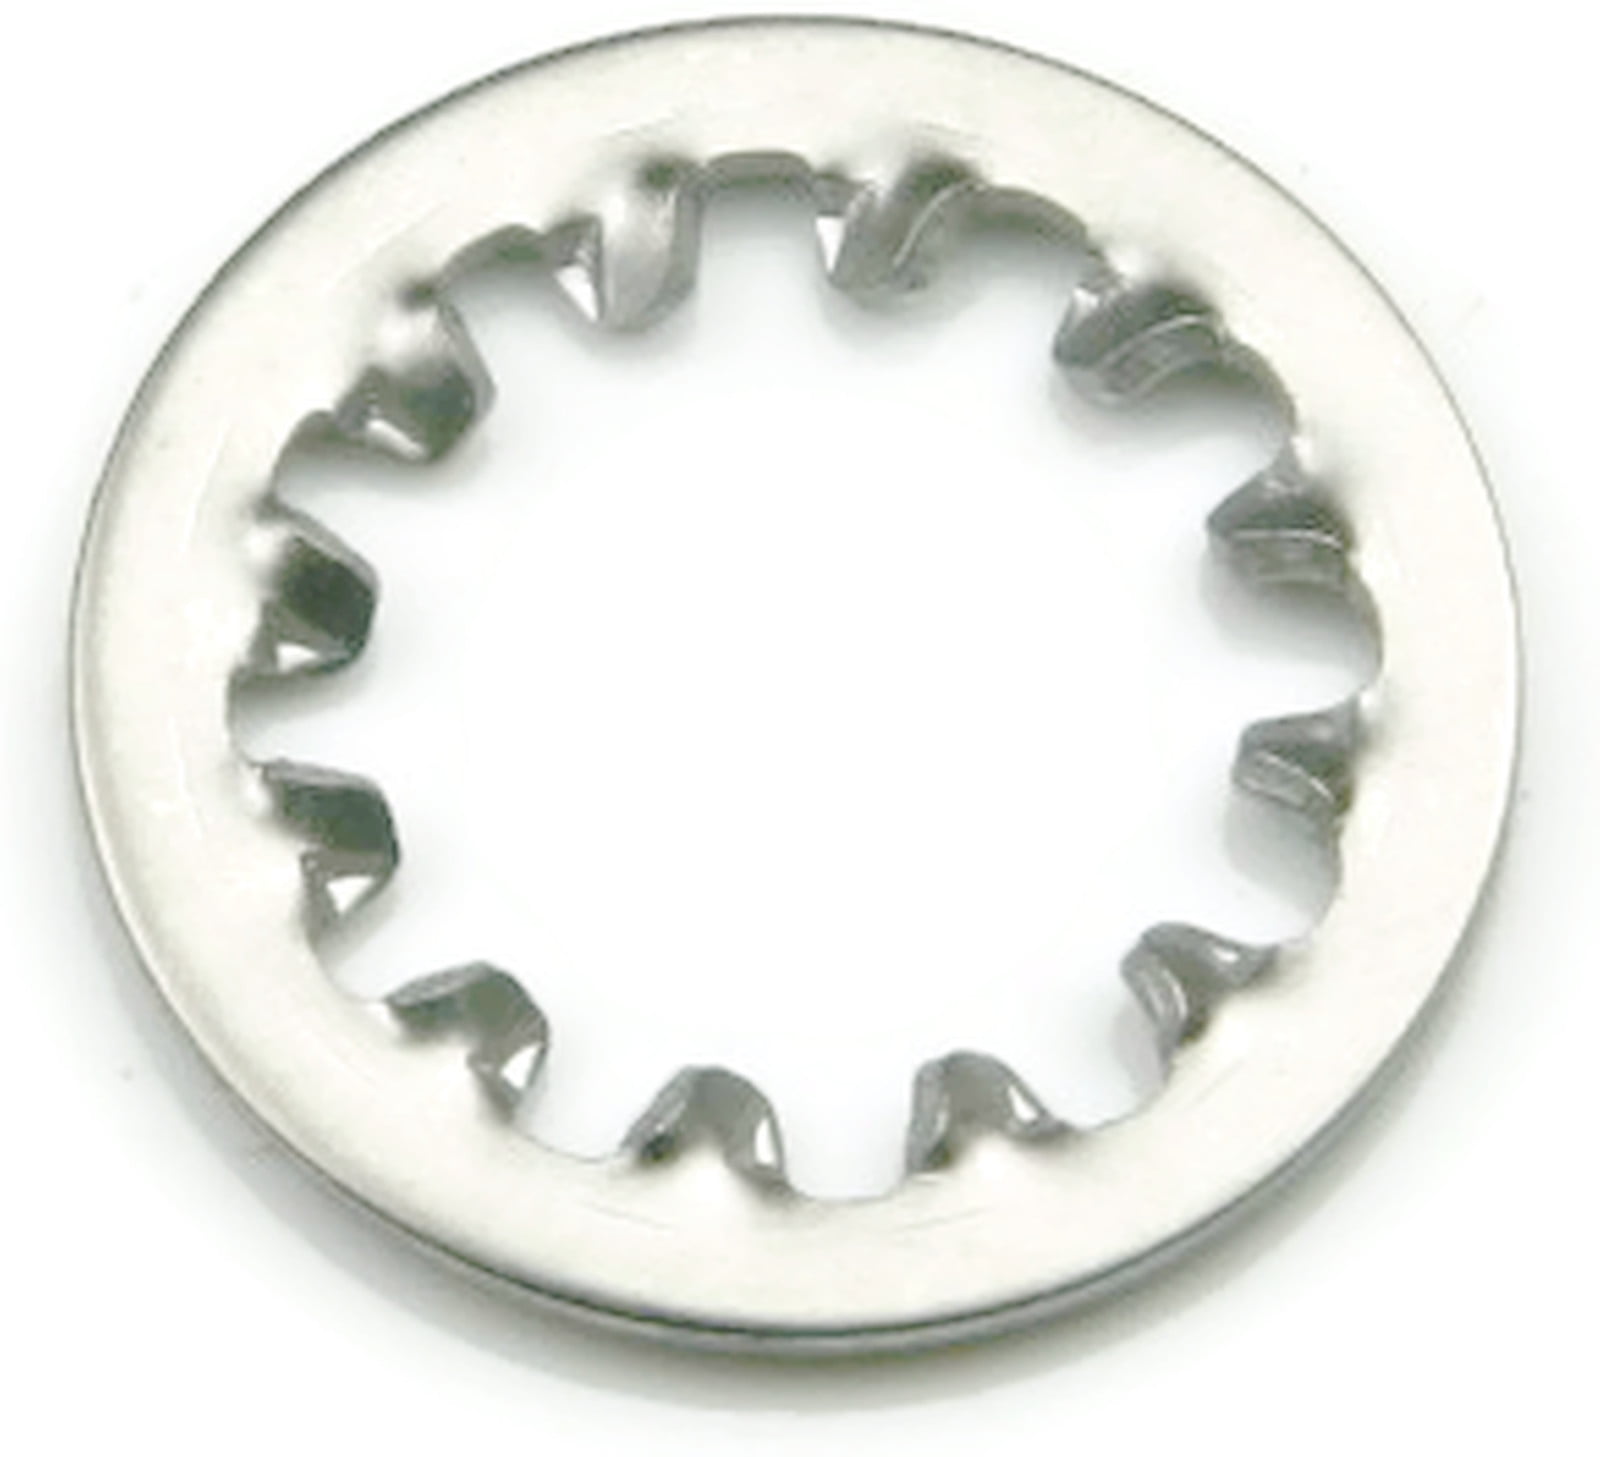 1,000 PACK M3 INTERNAL TOOTH LOCK WASHER 18-8 STAINLESS STEEL FREE SHIPPING NH 